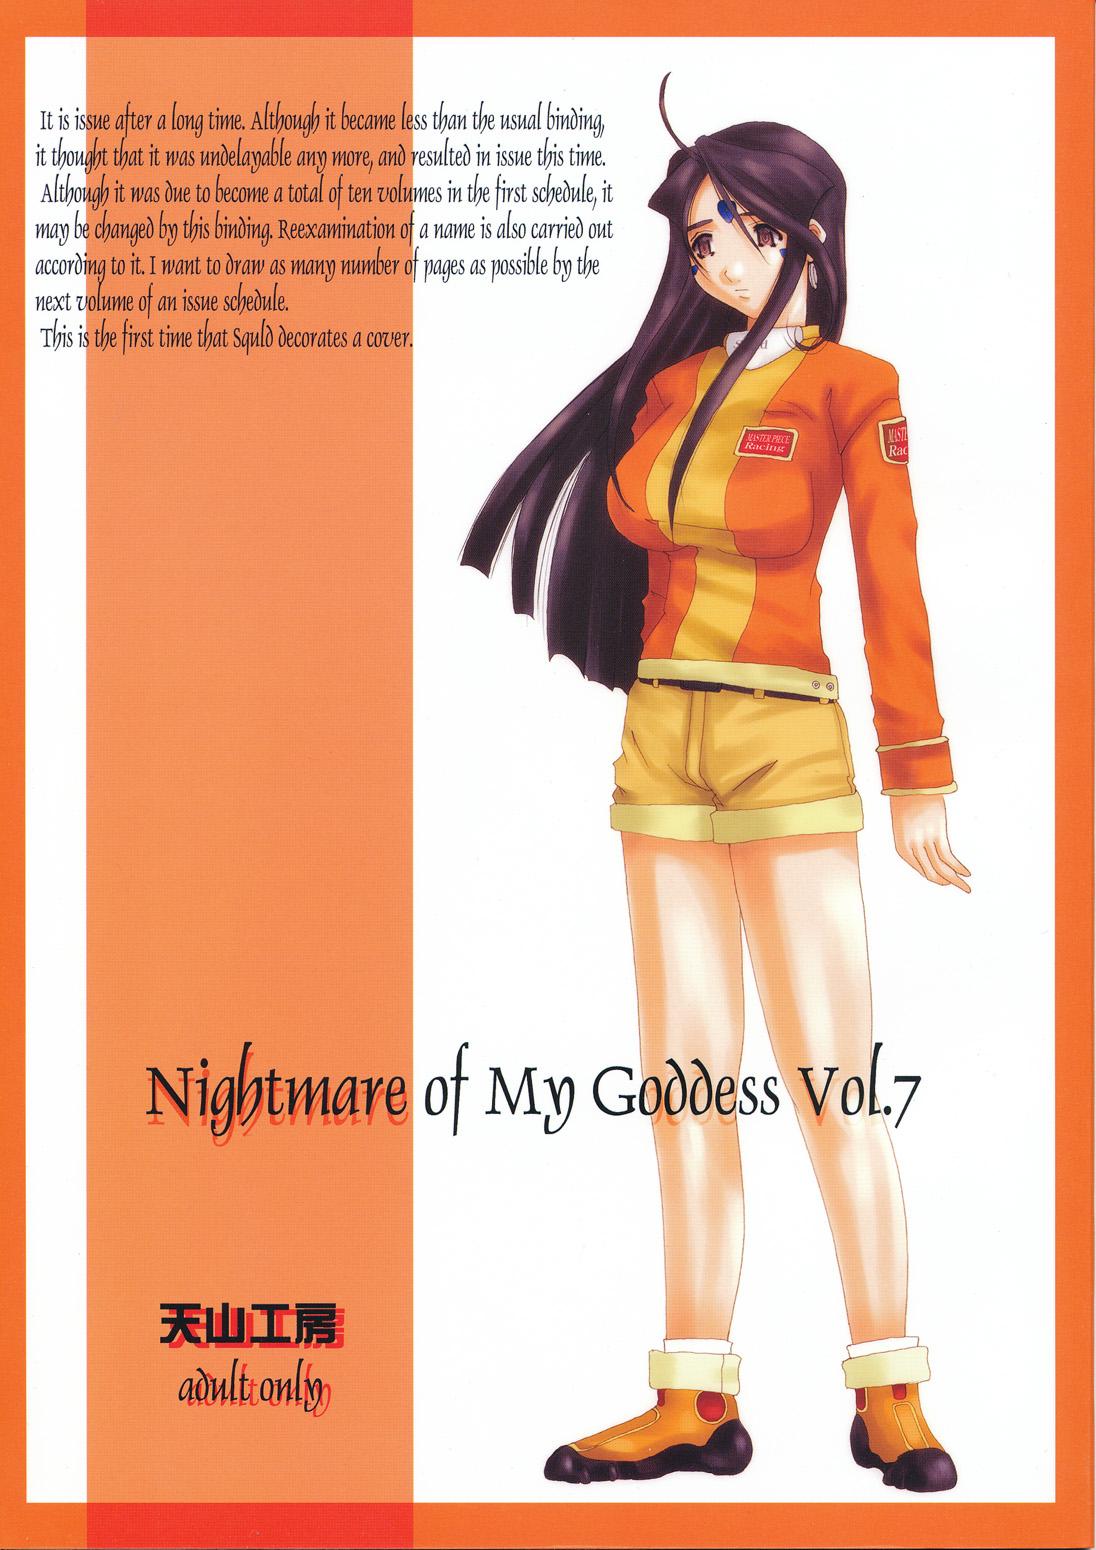 Blowjobs Nightmare of My Goddess Vol. 7 - Ah my goddess Awesome - Page 1